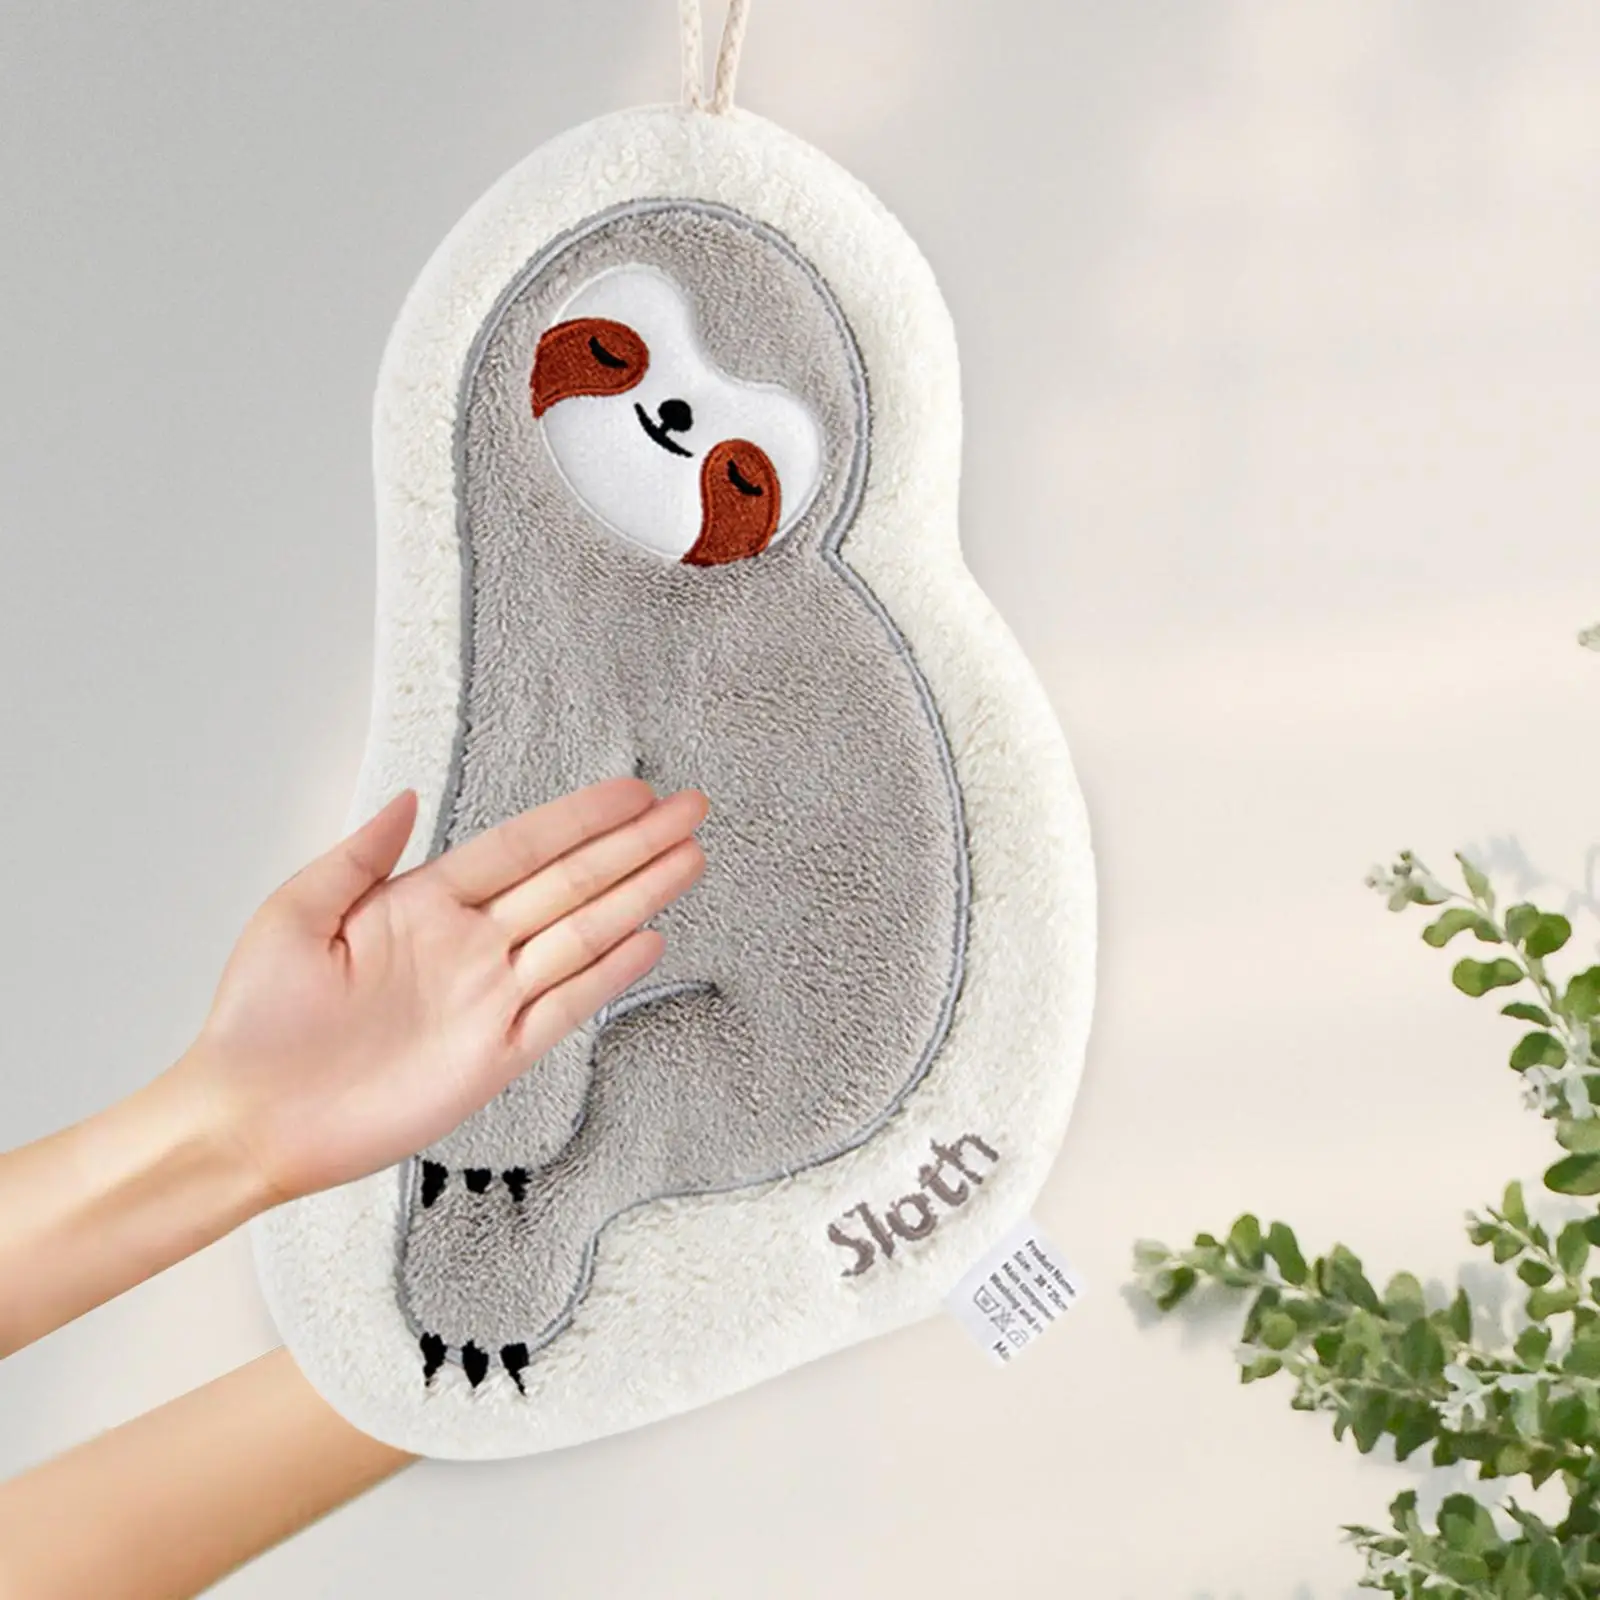 Funny Sloth Hanging Hand Towel Decorative Animal Hand Towels Highly Absorbent